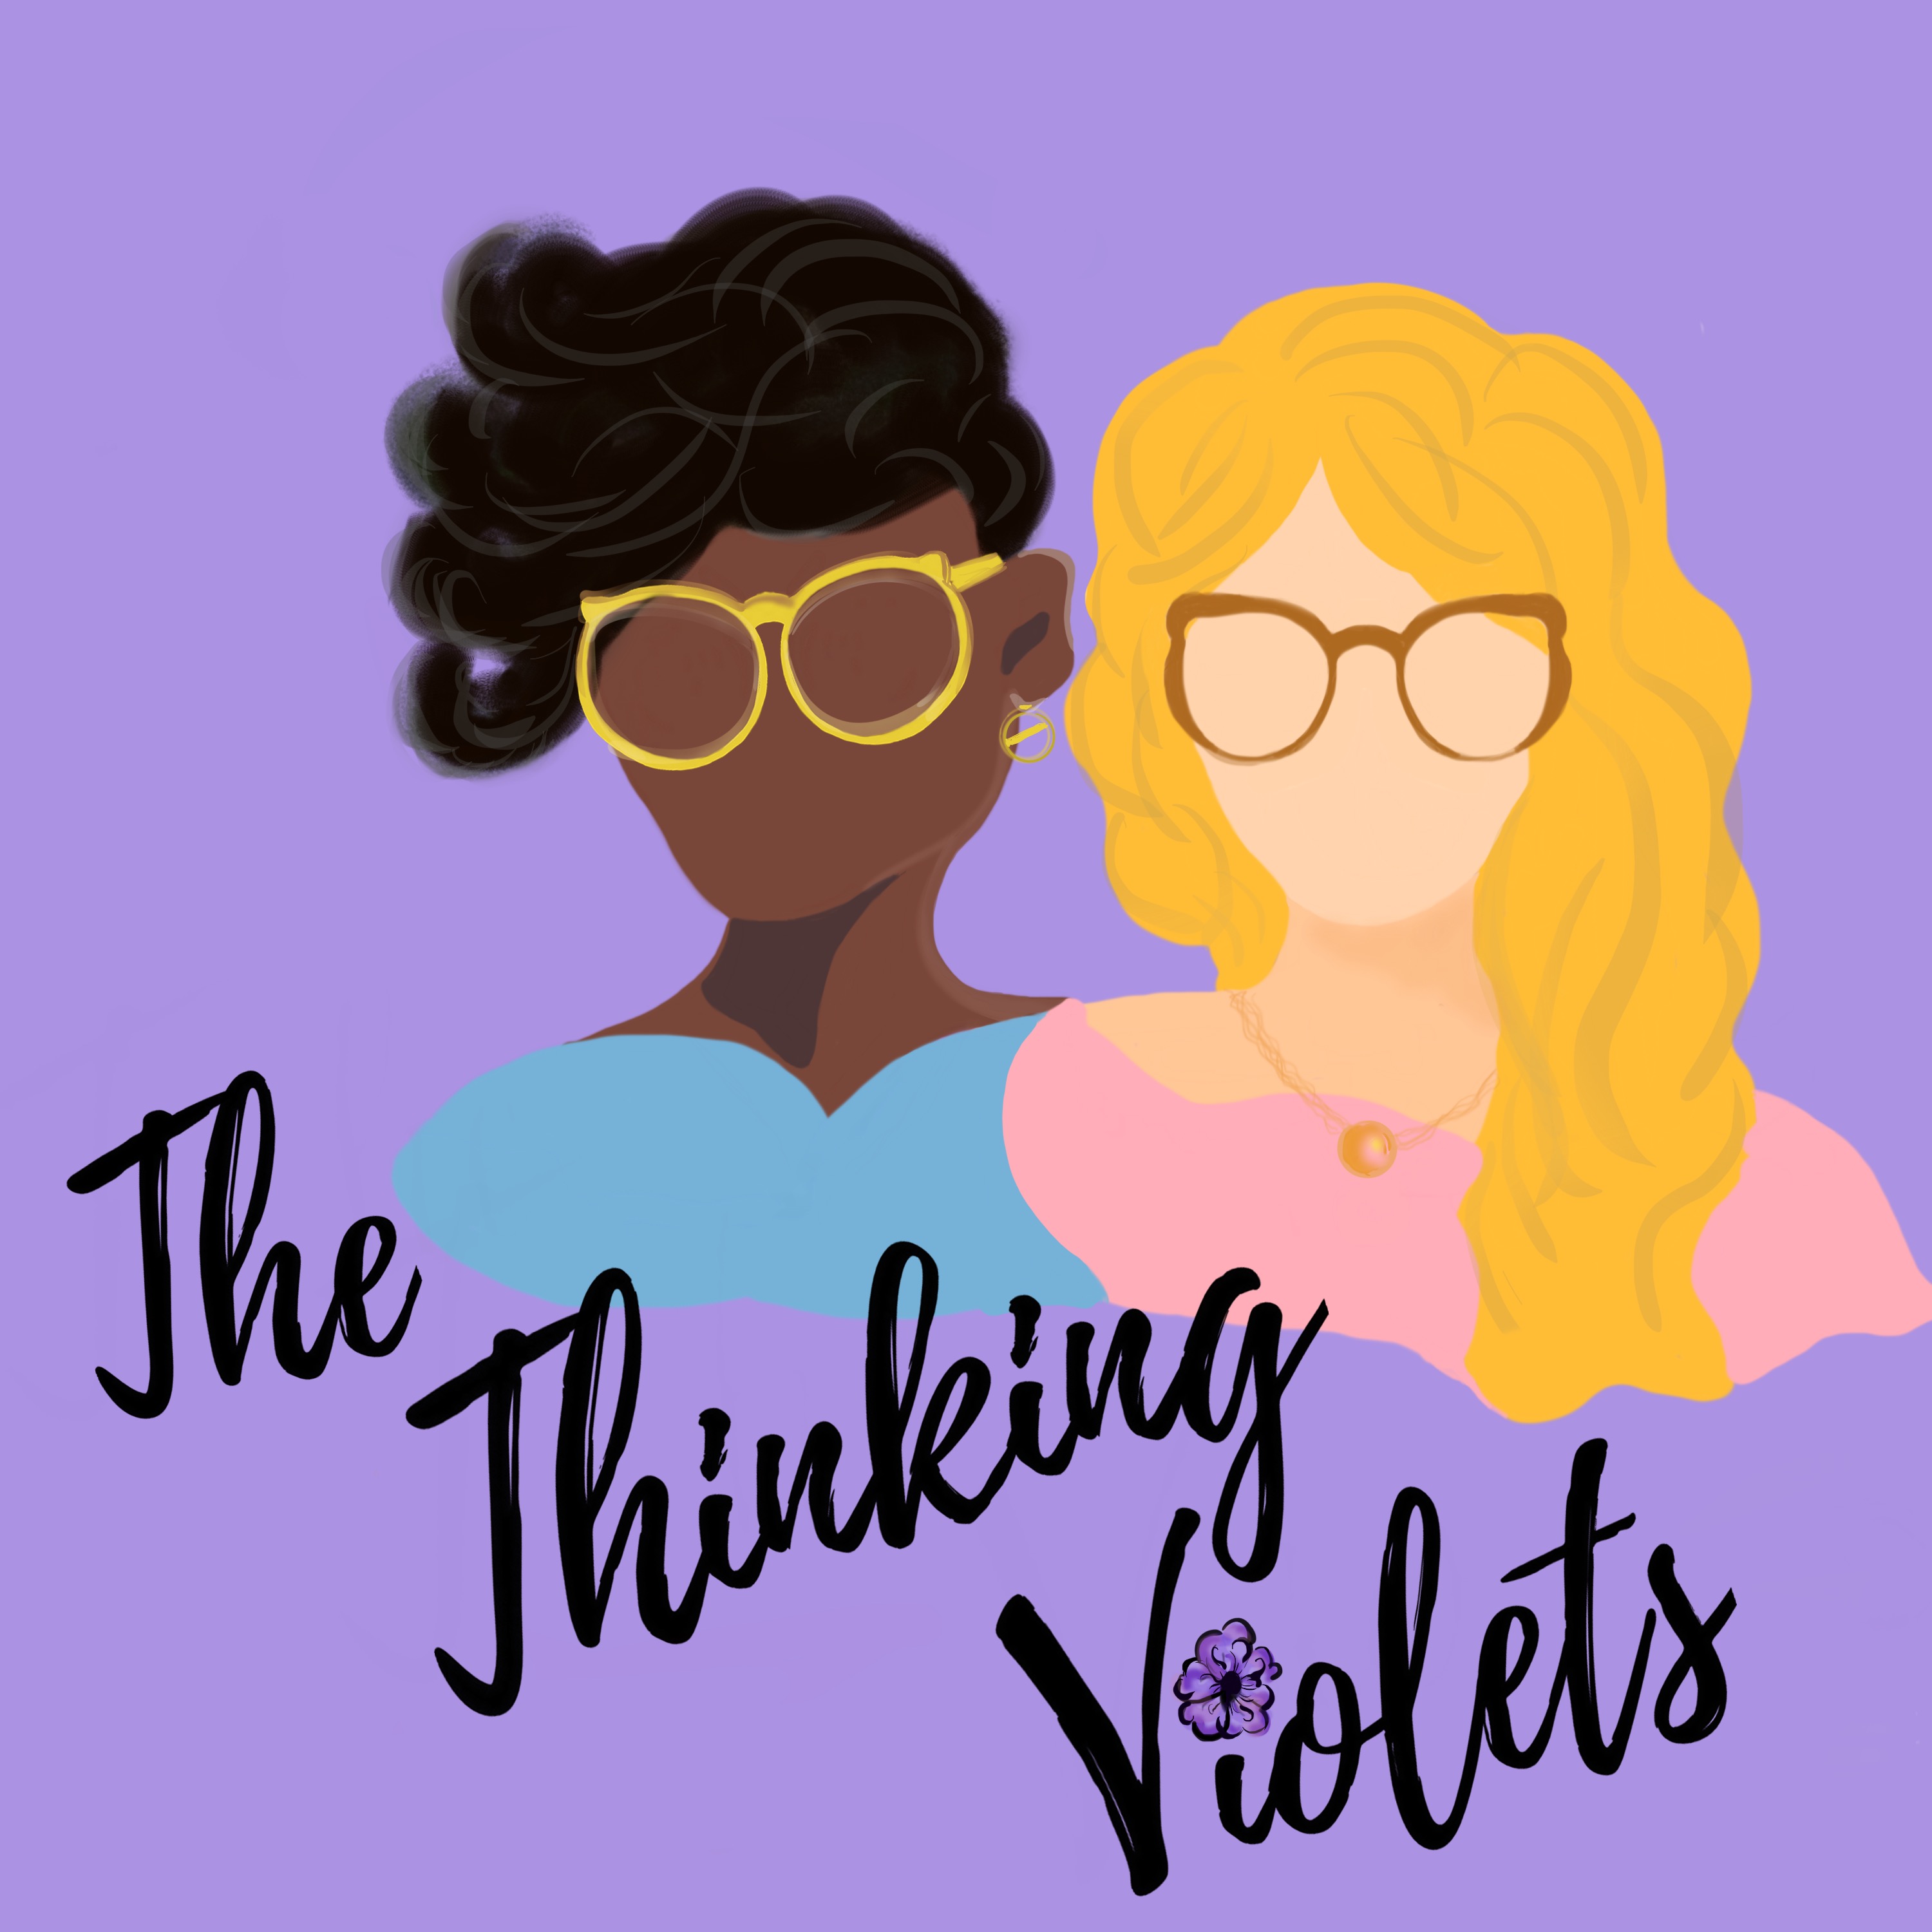 The Thinking Violets